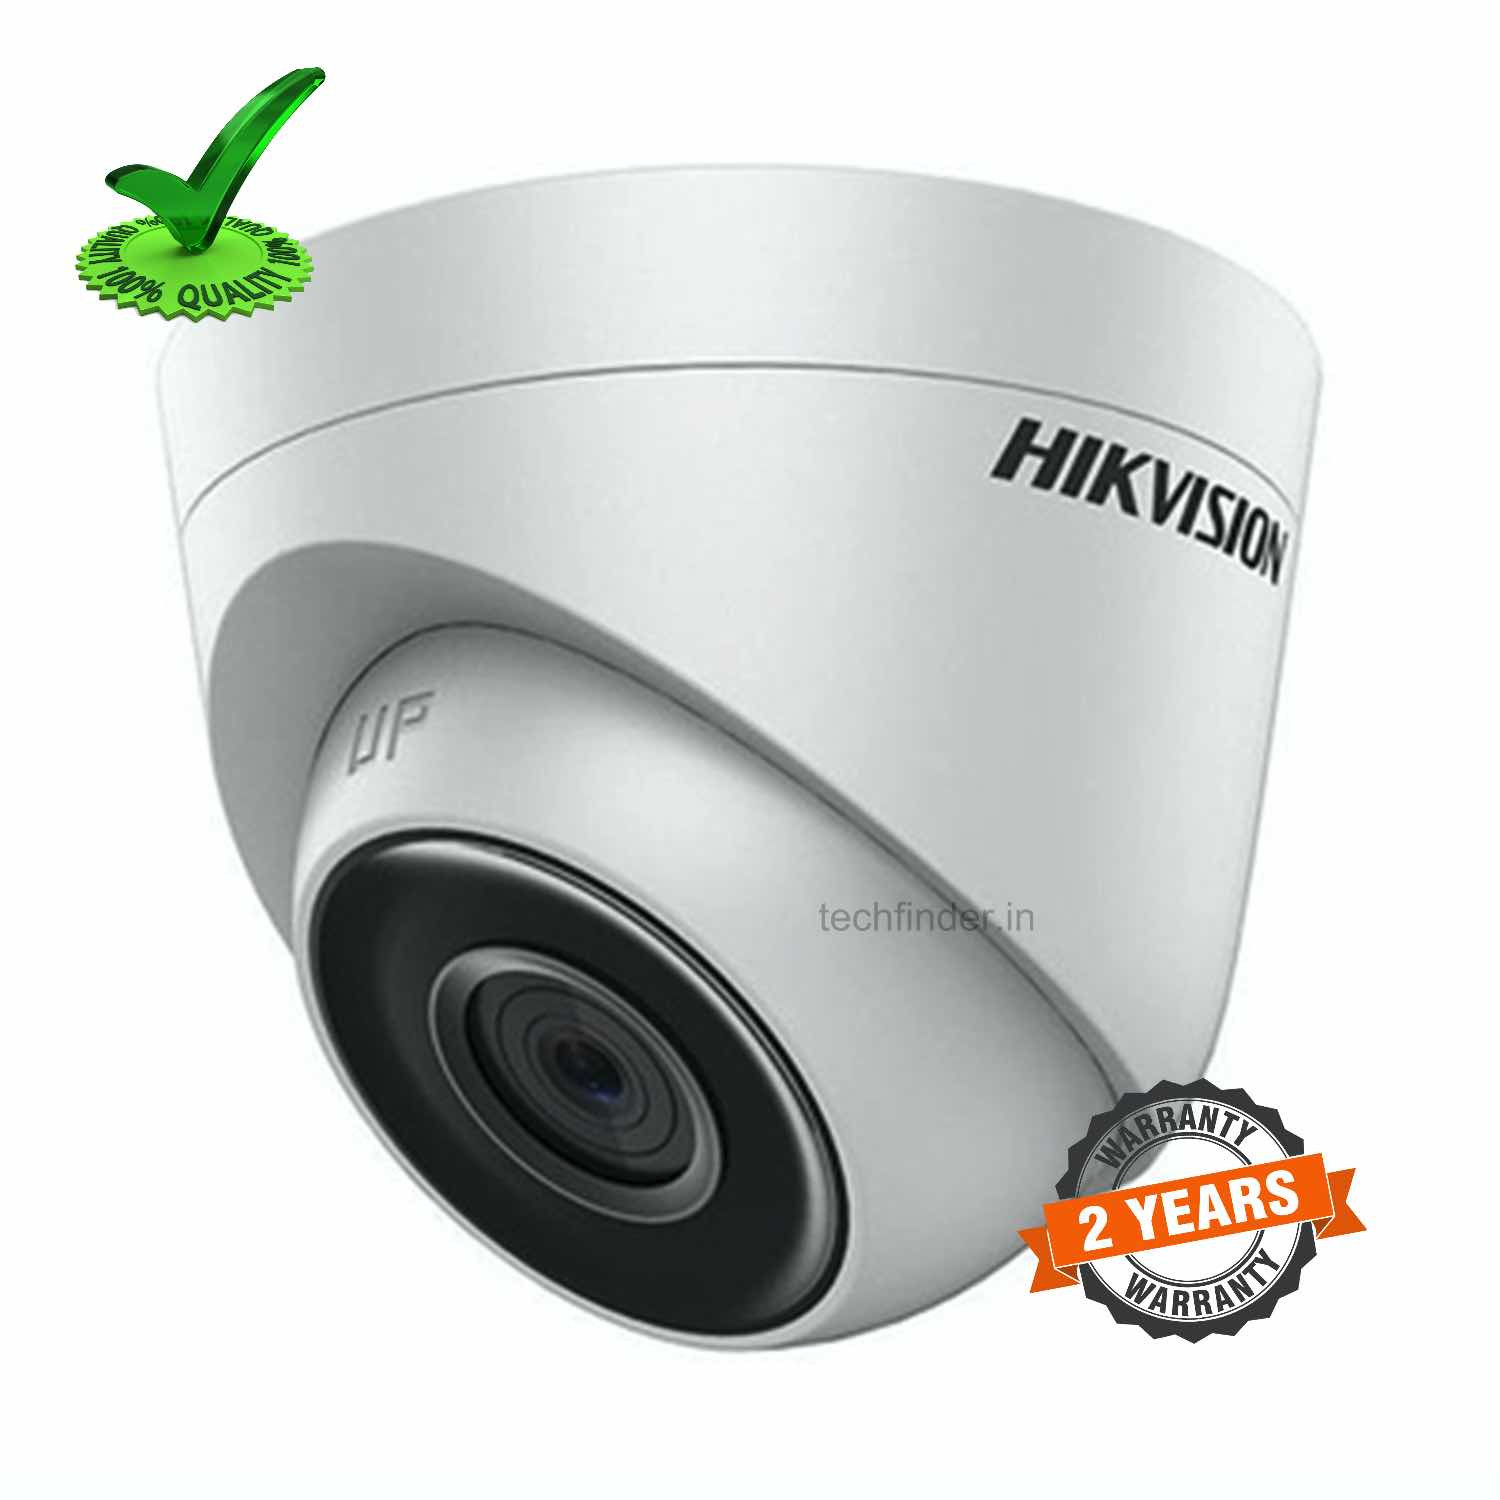 Hikvision DS 2CE56H0T ITPF 5 Mp Digital Dome Camera